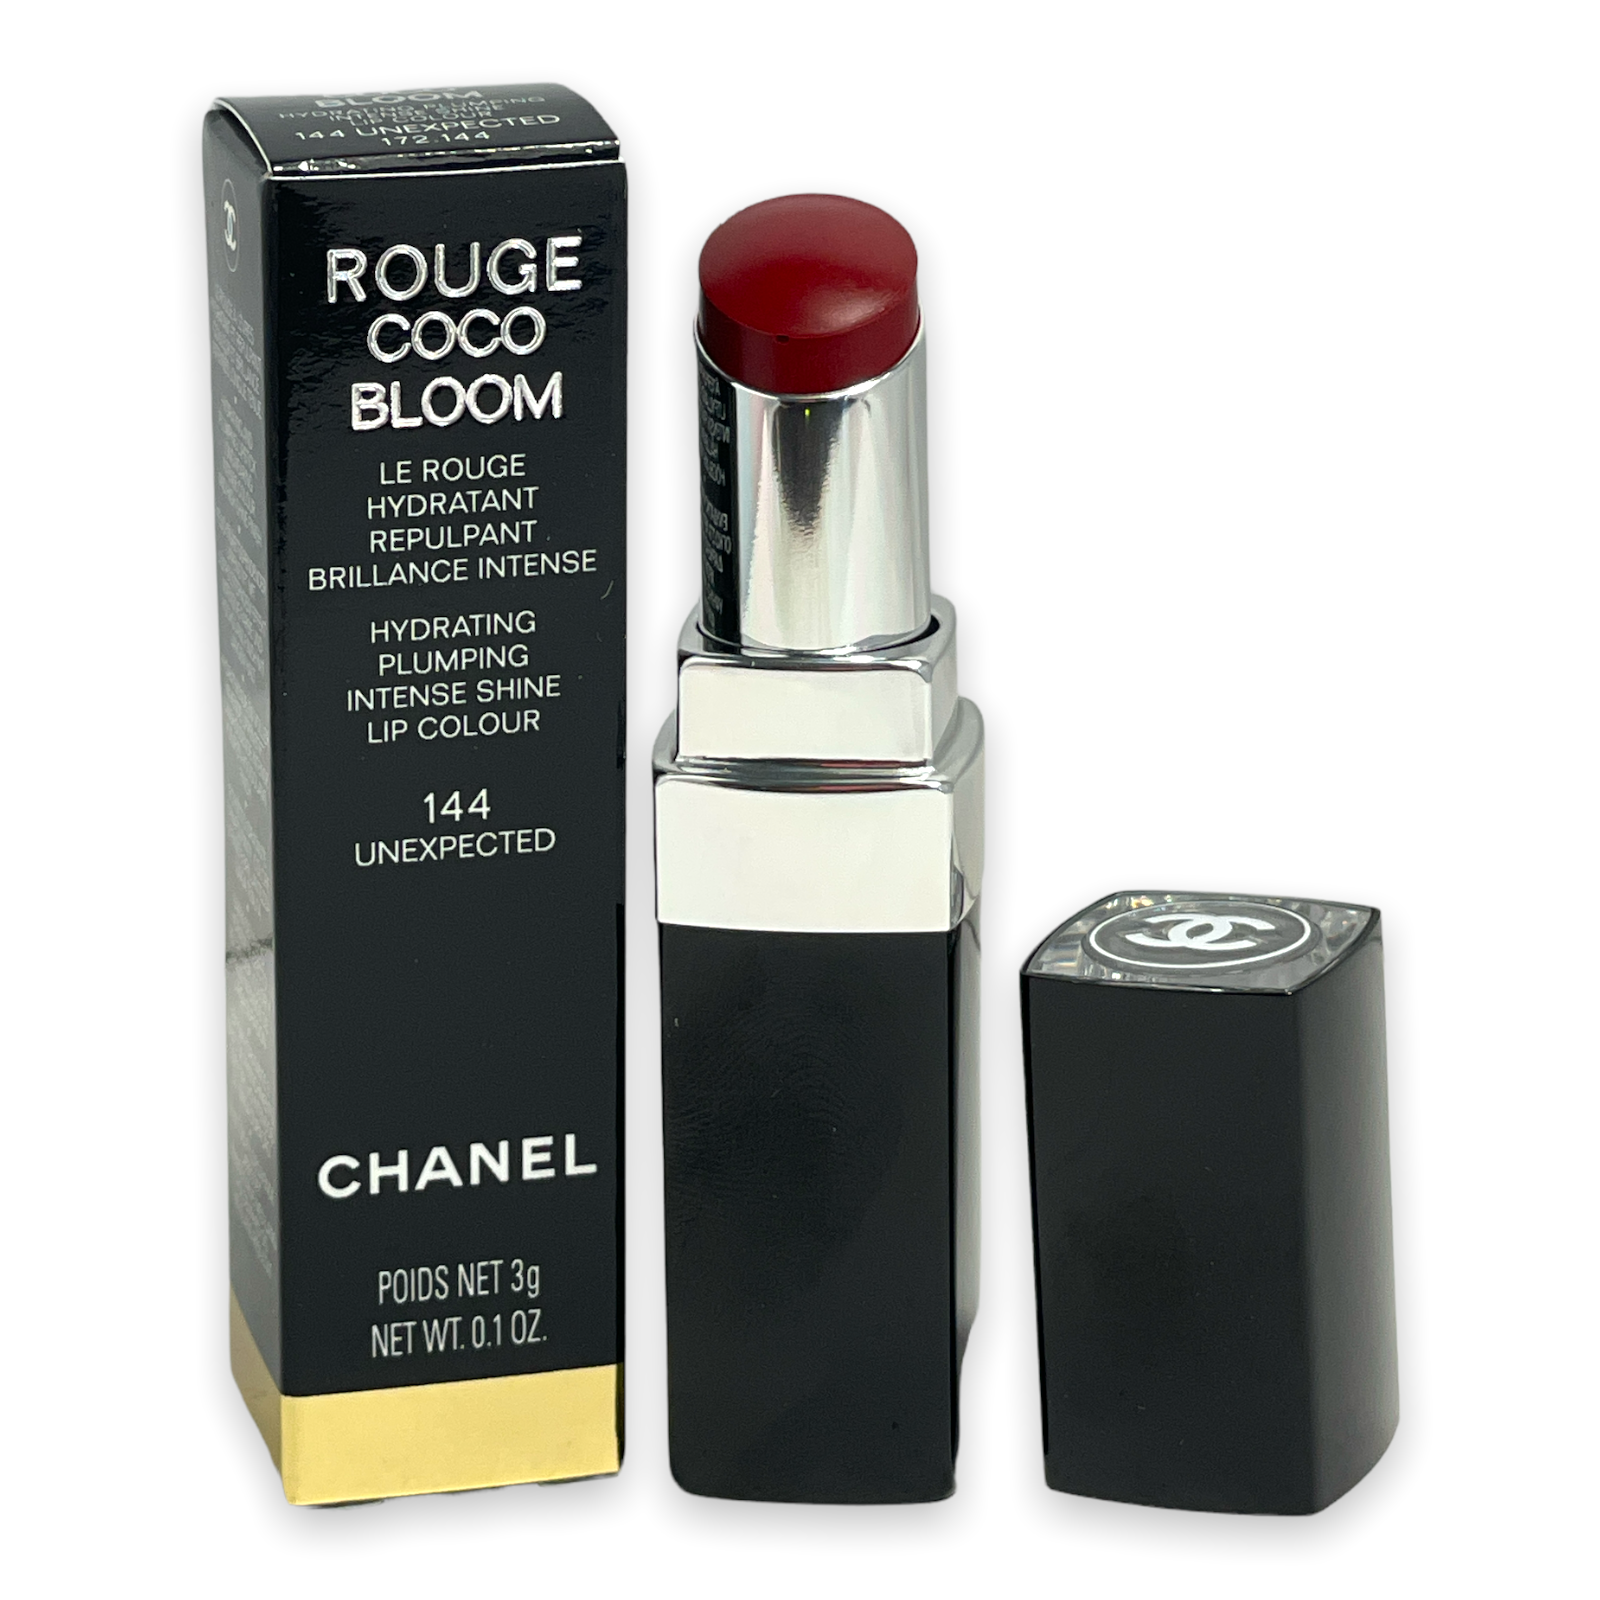 CHANEL+Rouge+Coco+Bloom+Hydrating+Plumping+Shine+Lip+Colour+Lipstick+144+Unexpec  for sale online